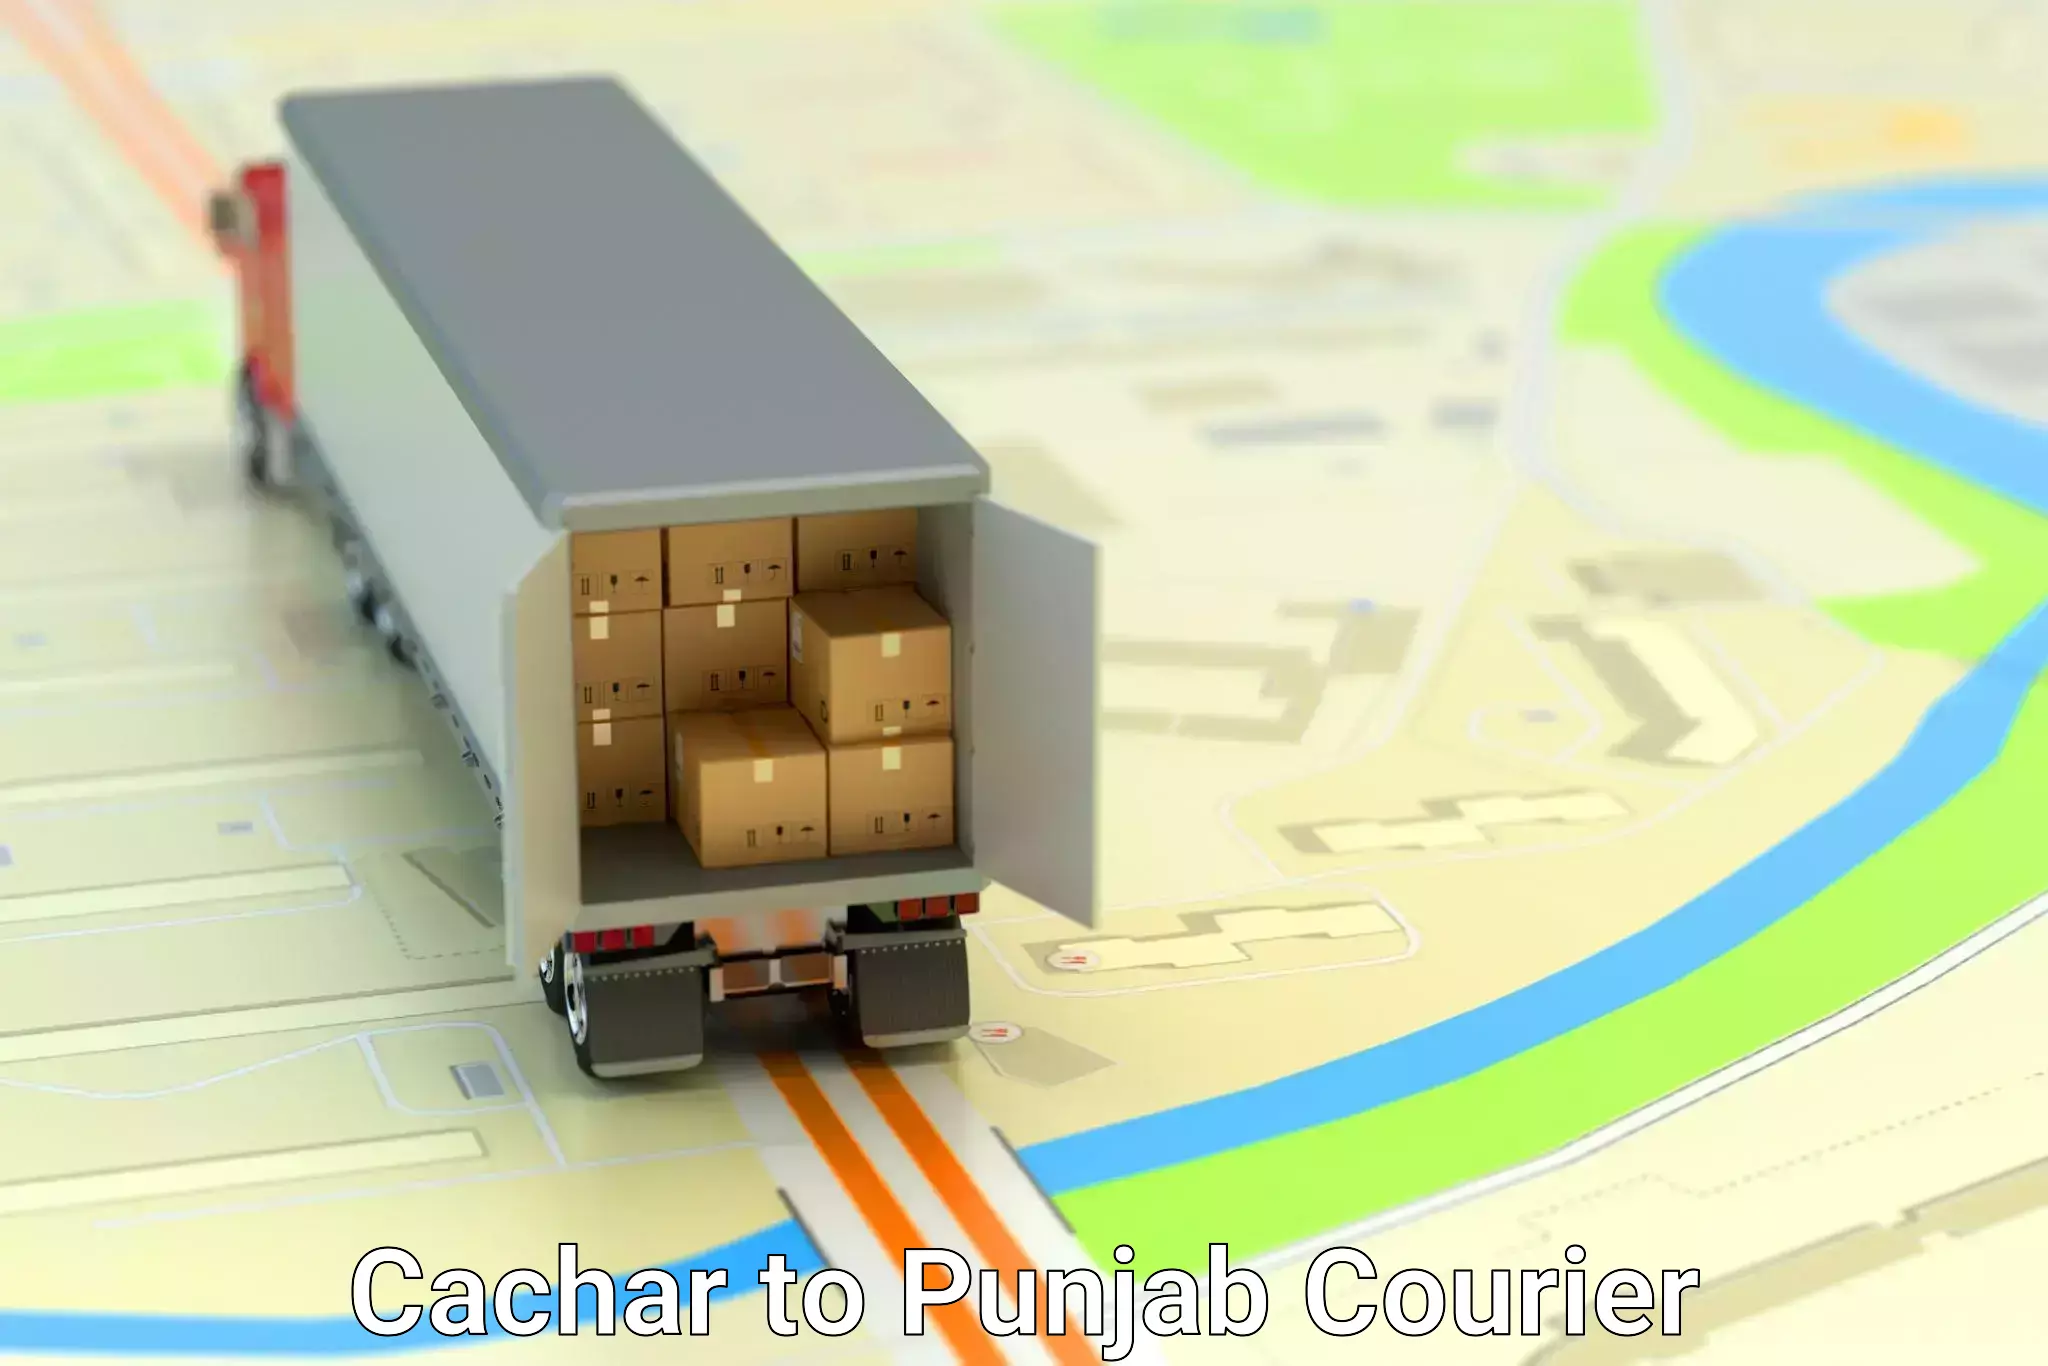 Next-day delivery options Cachar to Nawanshahr